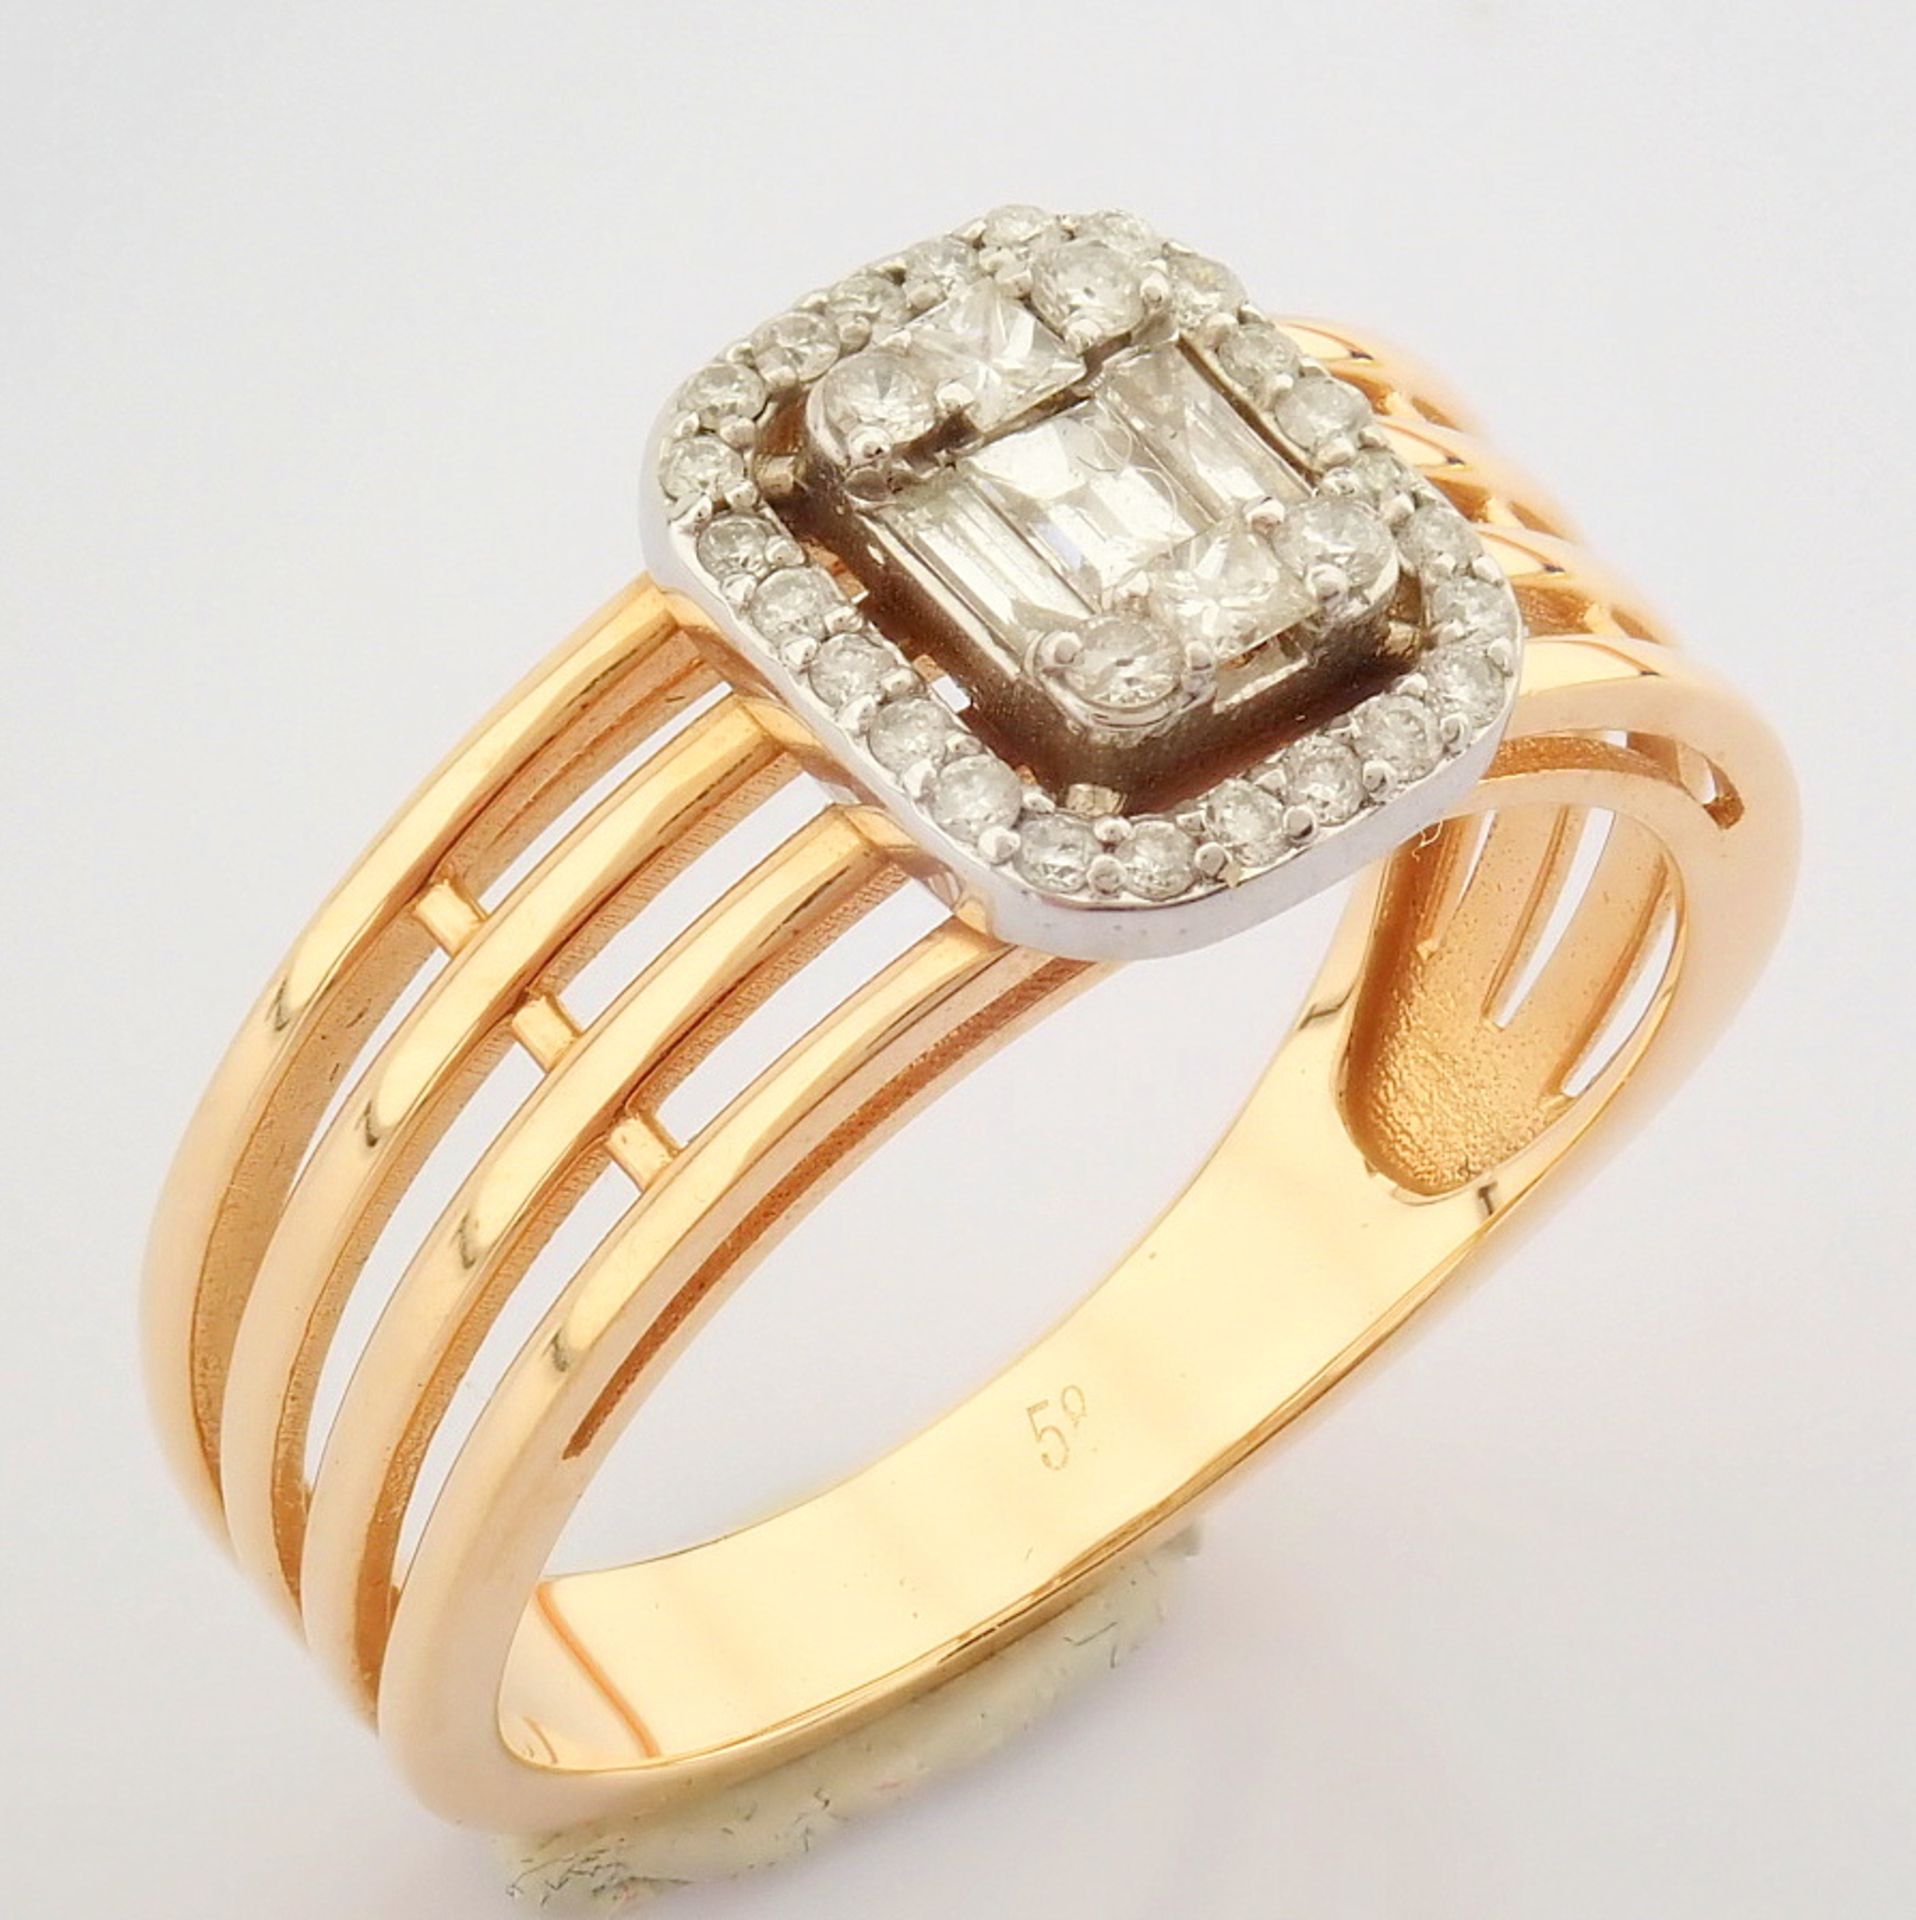 Certificated 14K White and Rose Gold Baguette Diamond & Diamond Ring (Total 0.31 ct Stone) - Image 2 of 6